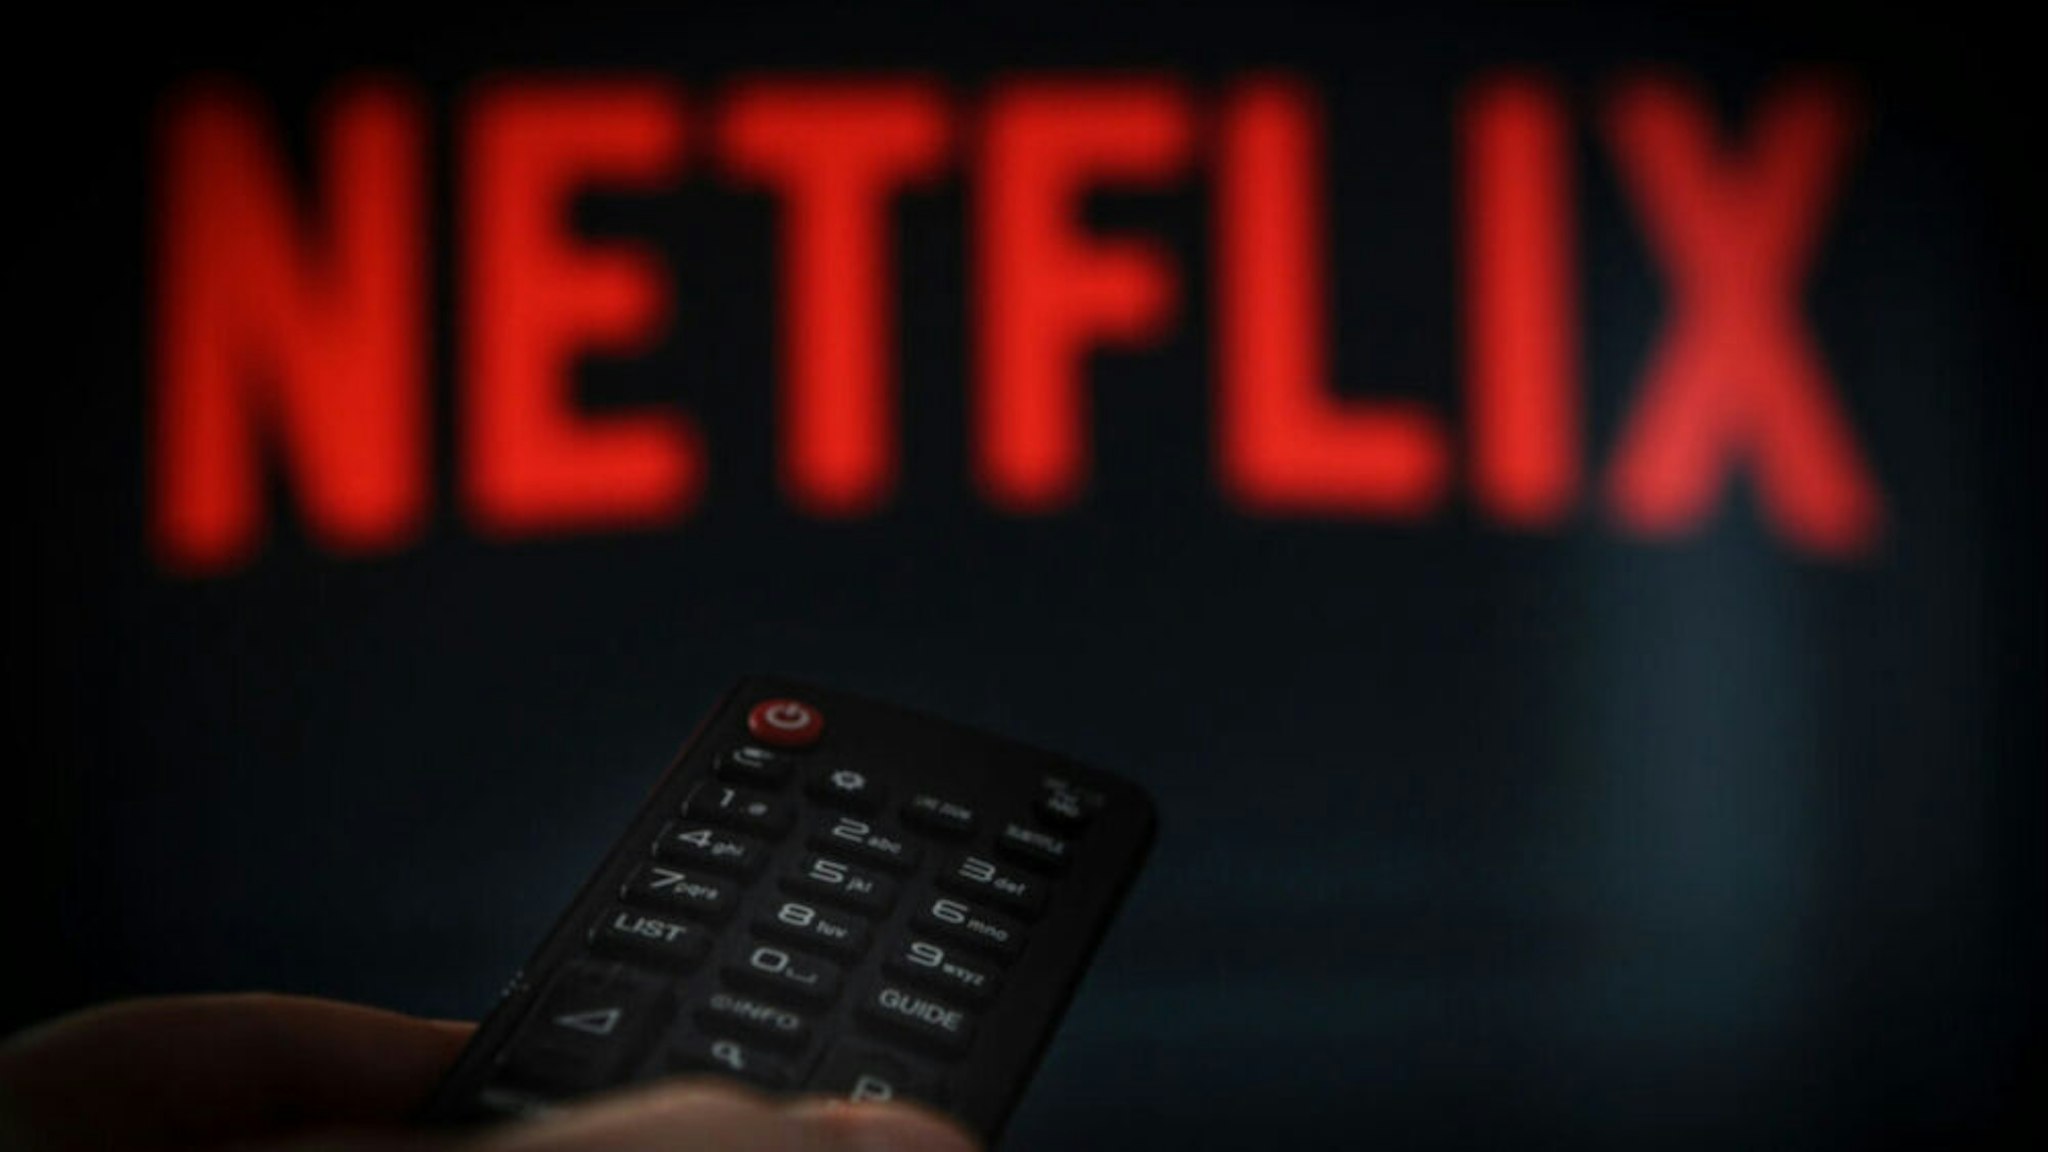 A remote control is seen being held in front of a television running the Netflix application on October 25, 2017.